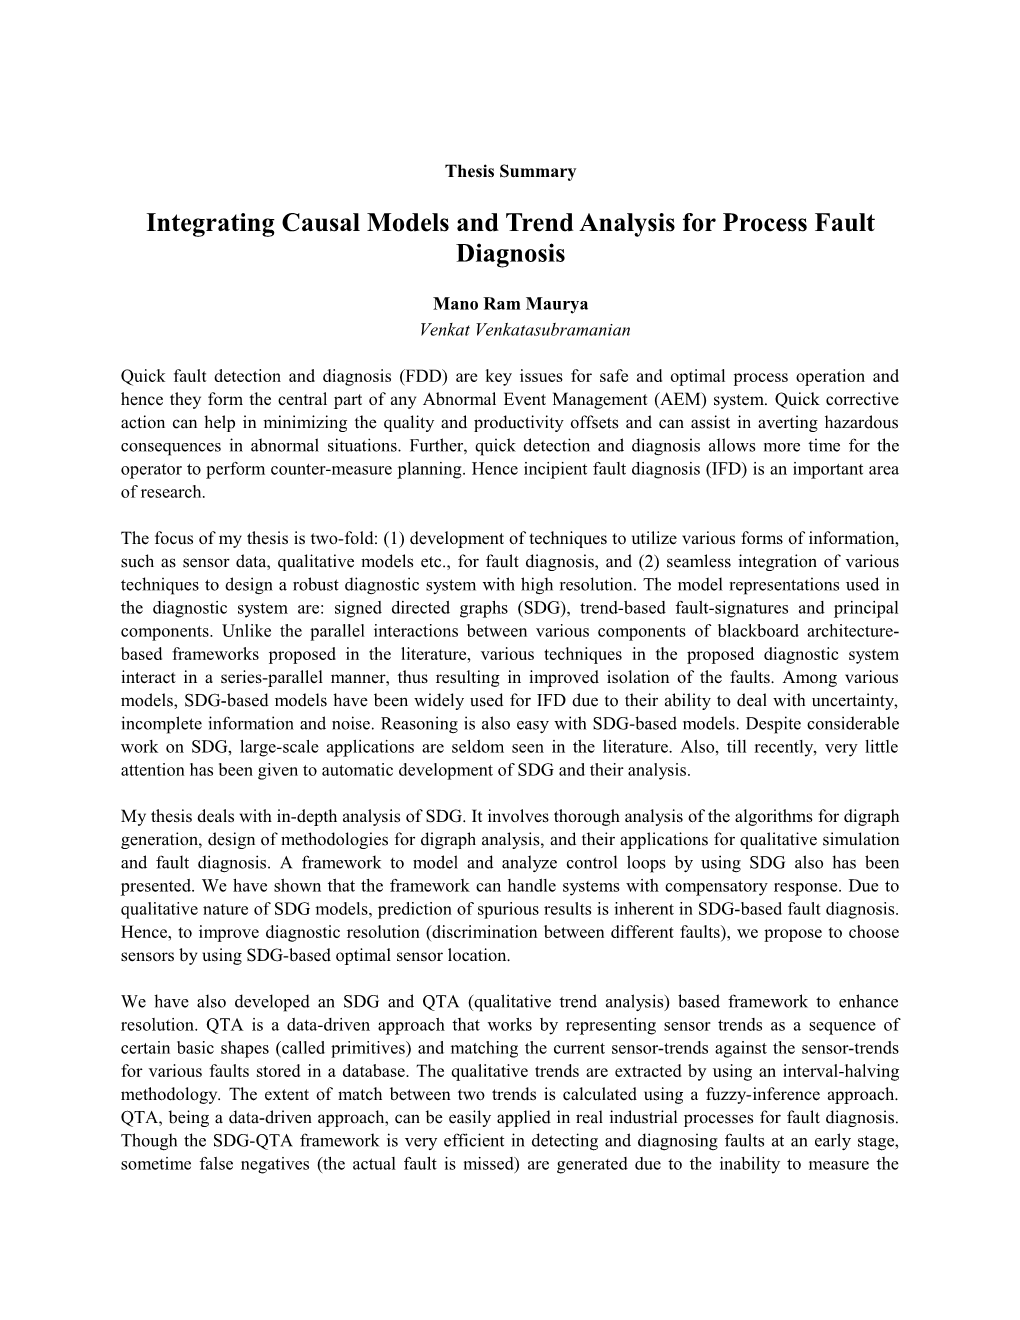 Integrating Causal Models and Trend Analysis for Process Fault Diagnosis